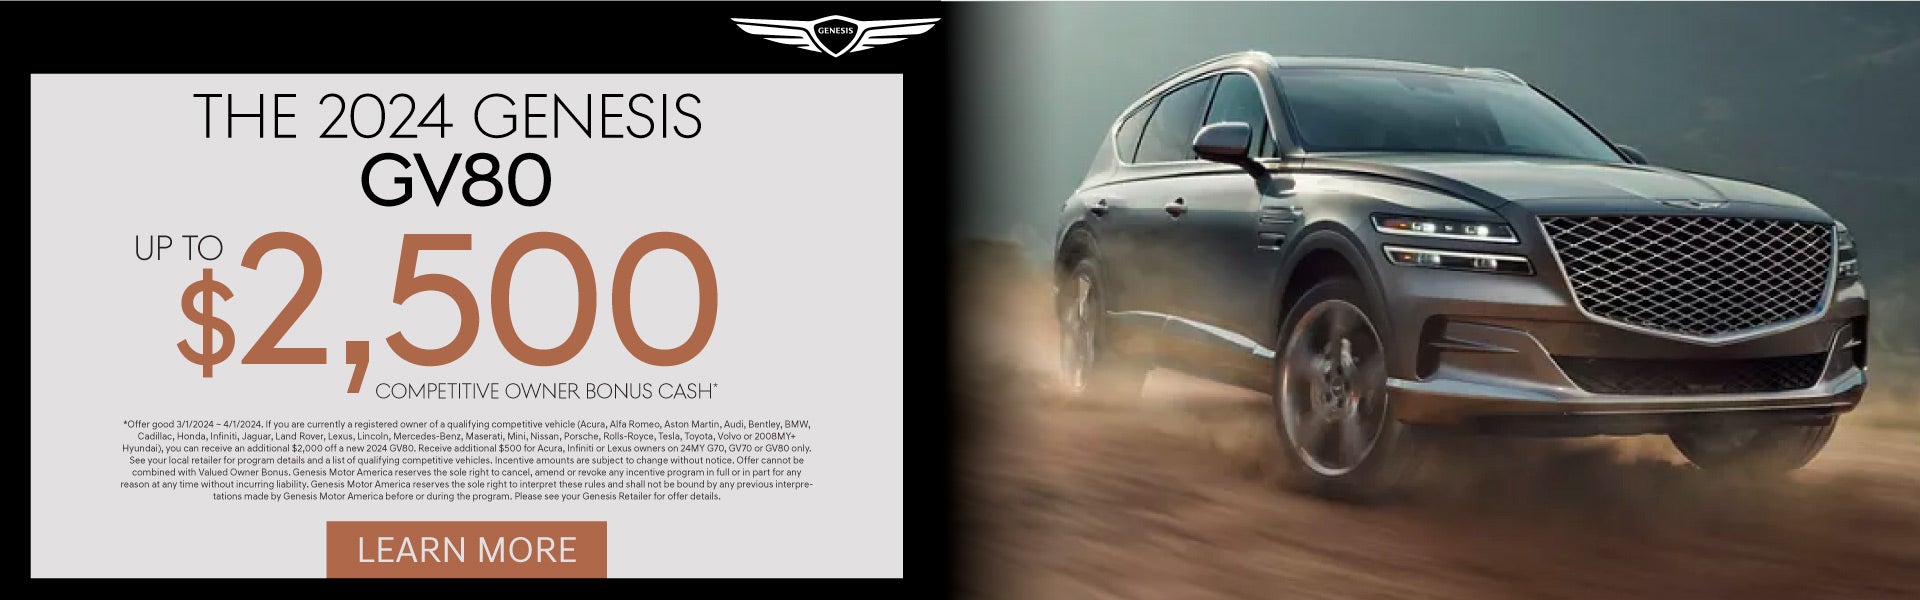 2024 Genesis GV80 up to 2,500 | Learn More